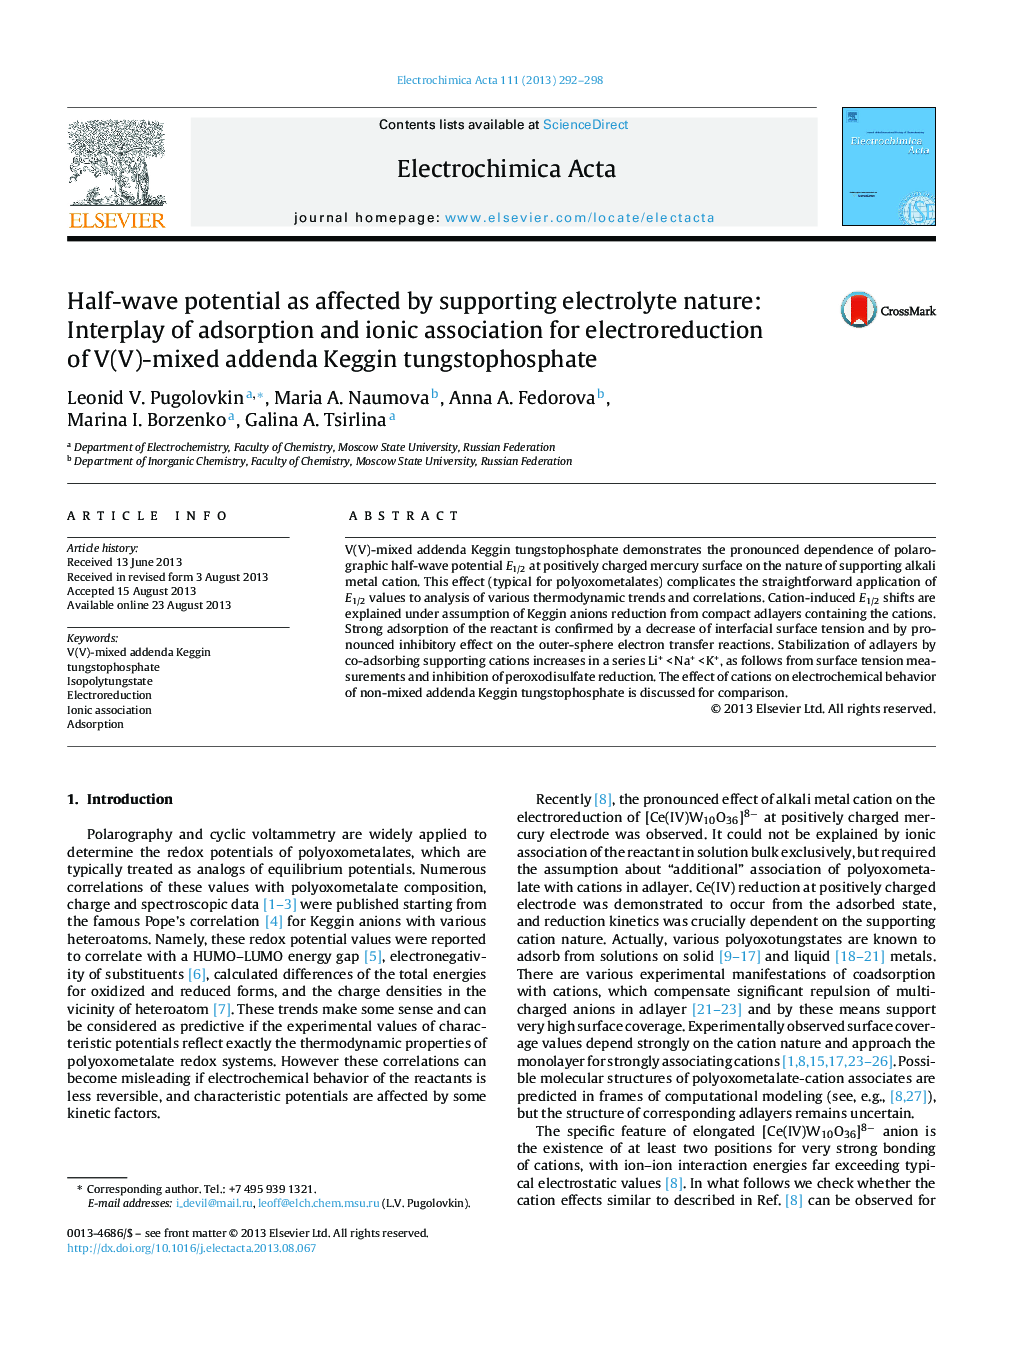 Half-wave potential as affected by supporting electrolyte nature: Interplay of adsorption and ionic association for electroreduction of V(V)-mixed addenda Keggin tungstophosphate